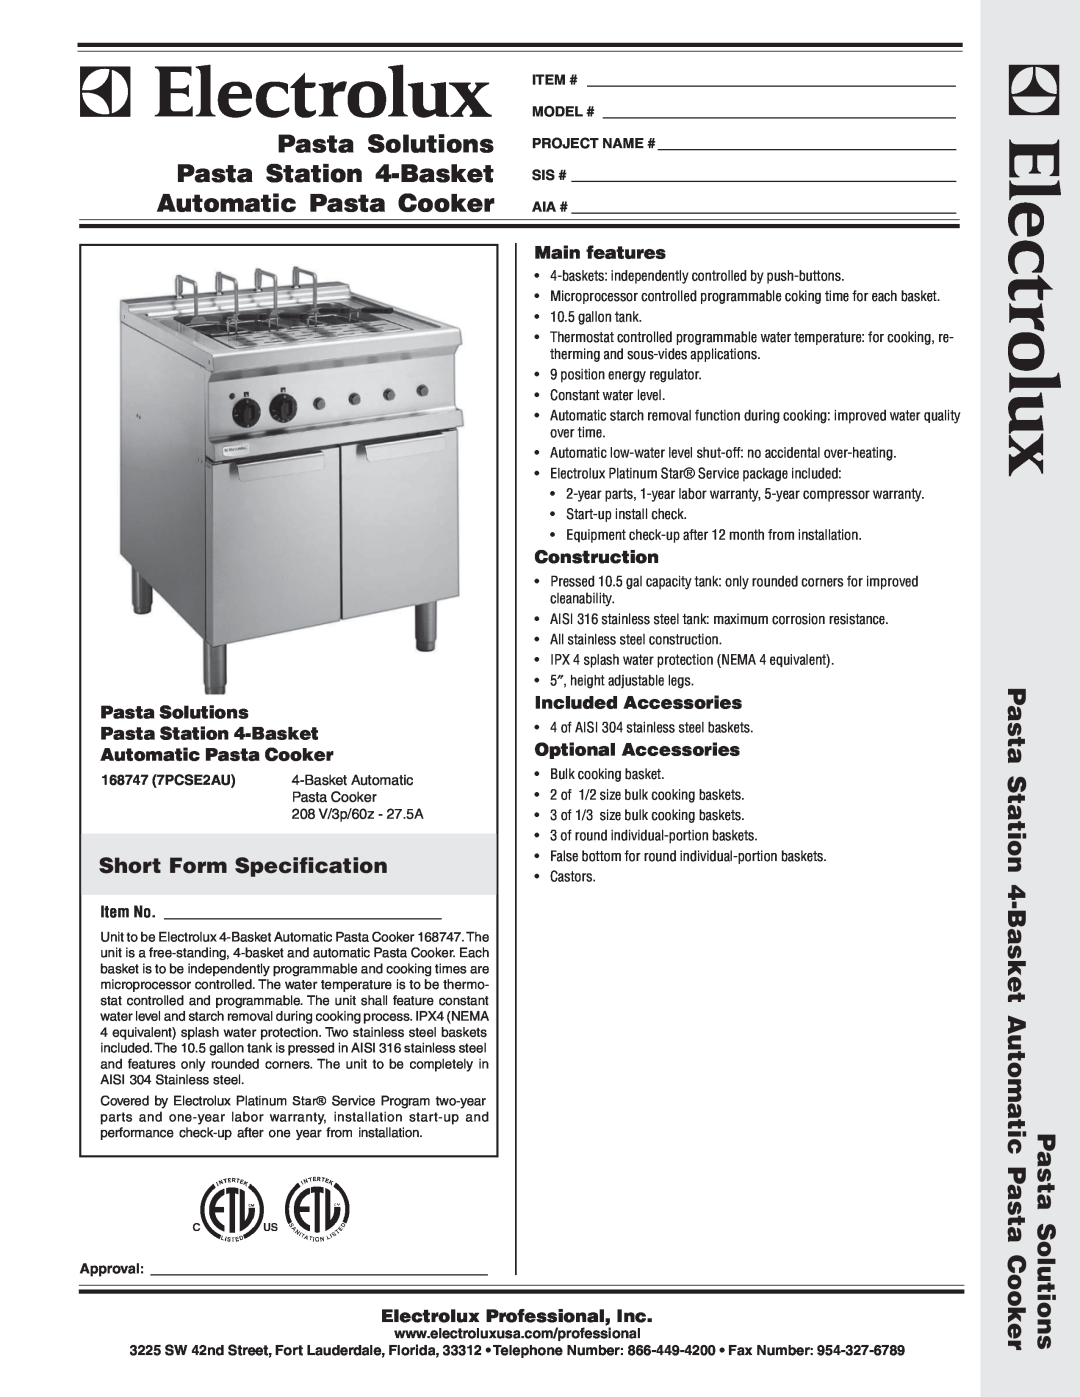 Electrolux 168747 (7PCSE2AU) warranty Short Form Specification, Main features, Construction, Included Accessories, Pasta 